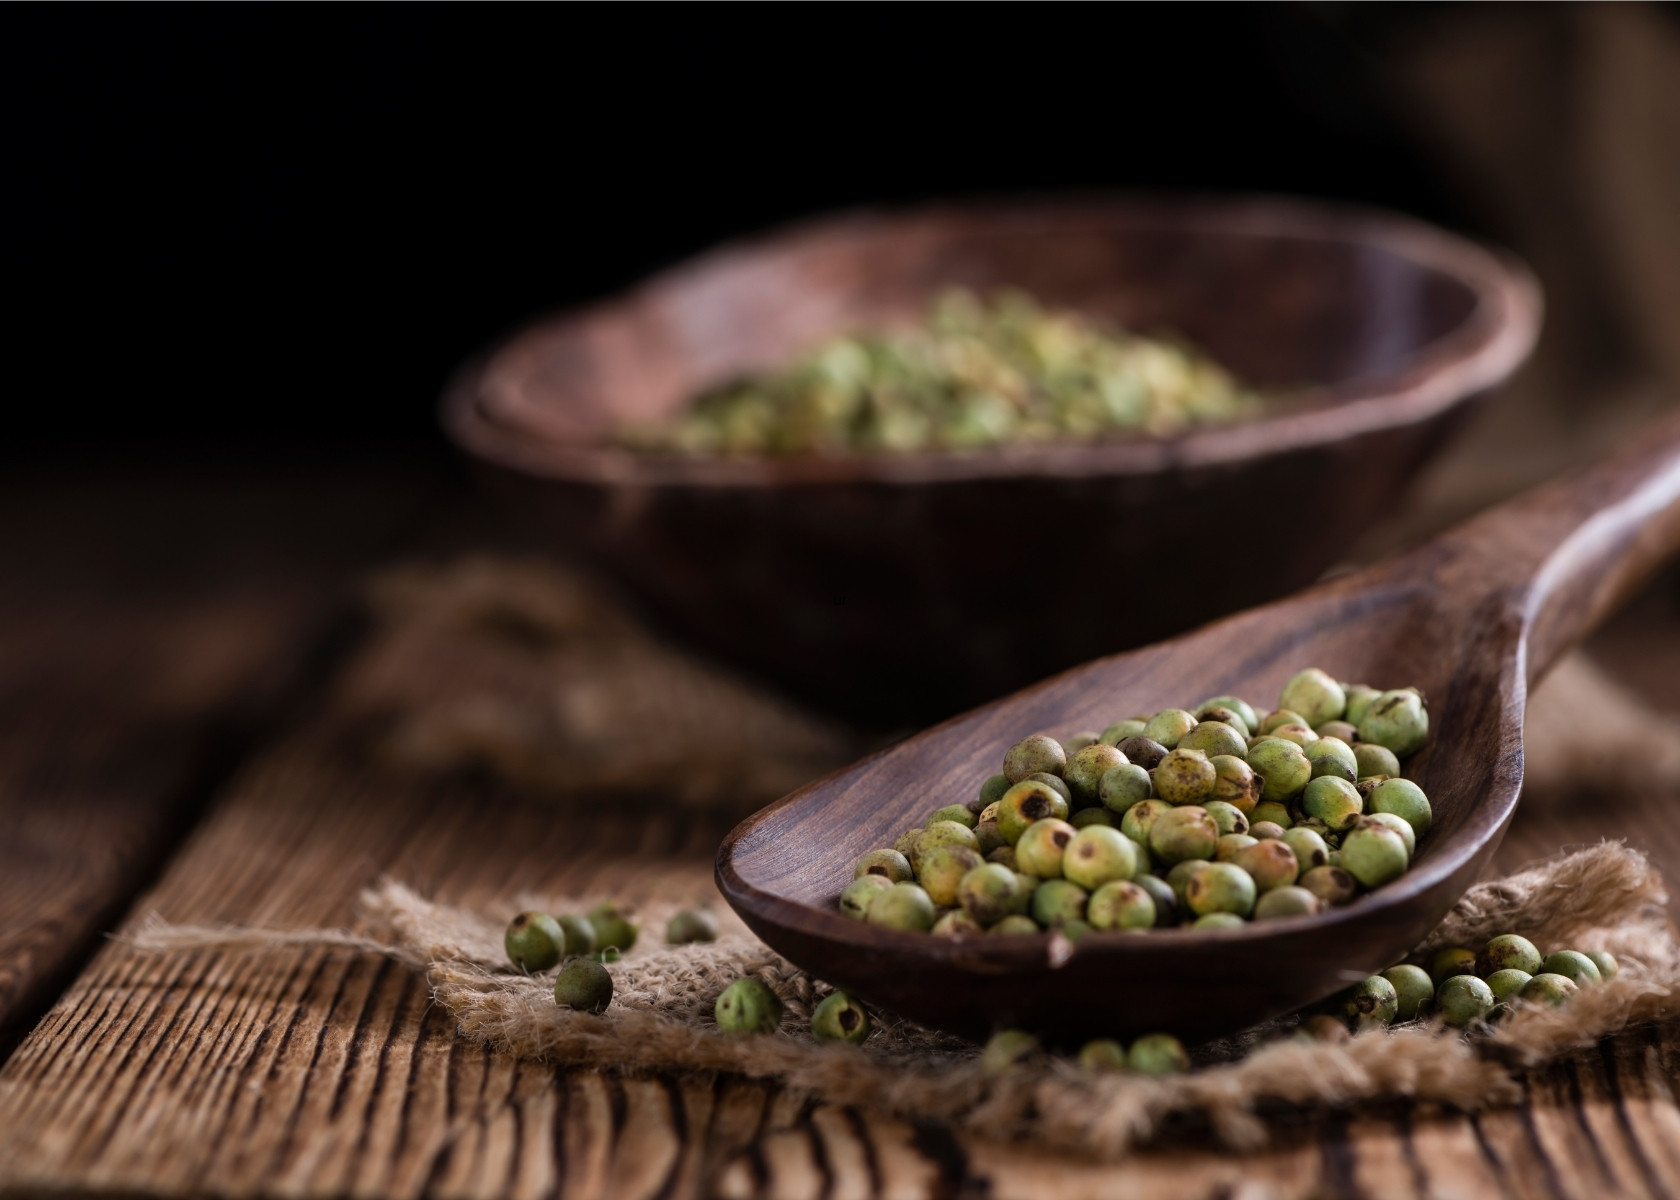 Green peppercorns in wood bowl next to large wooden spilled filled with more peppercorns.